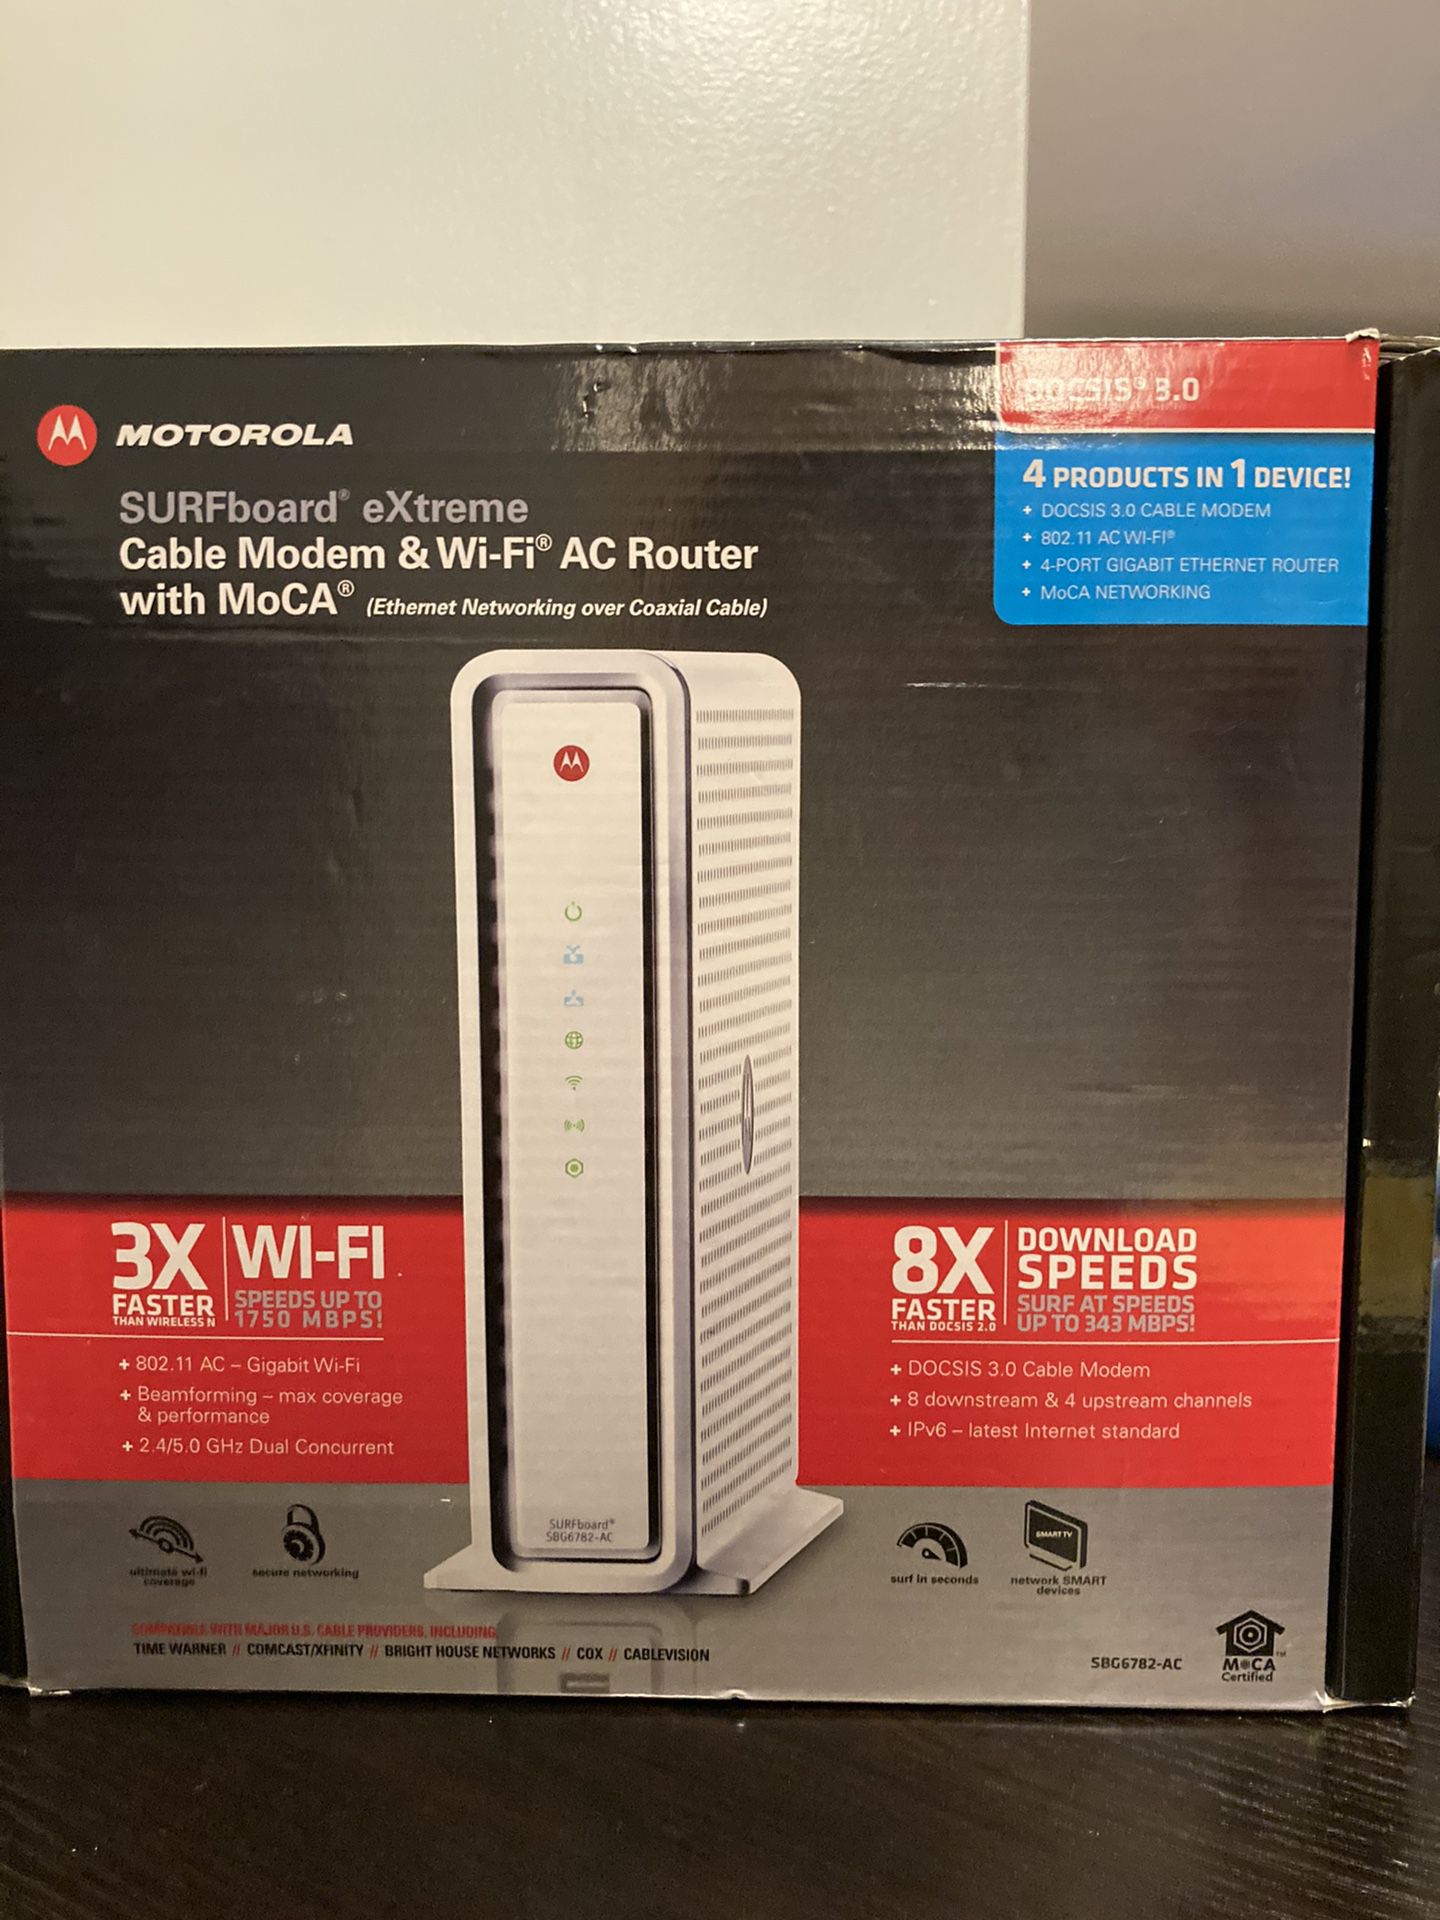 MOTOROLA SURFboard eXtreme 4 in 1 Cable Módem & Wi-Fi AC Router SBG6782-AC NEW!!